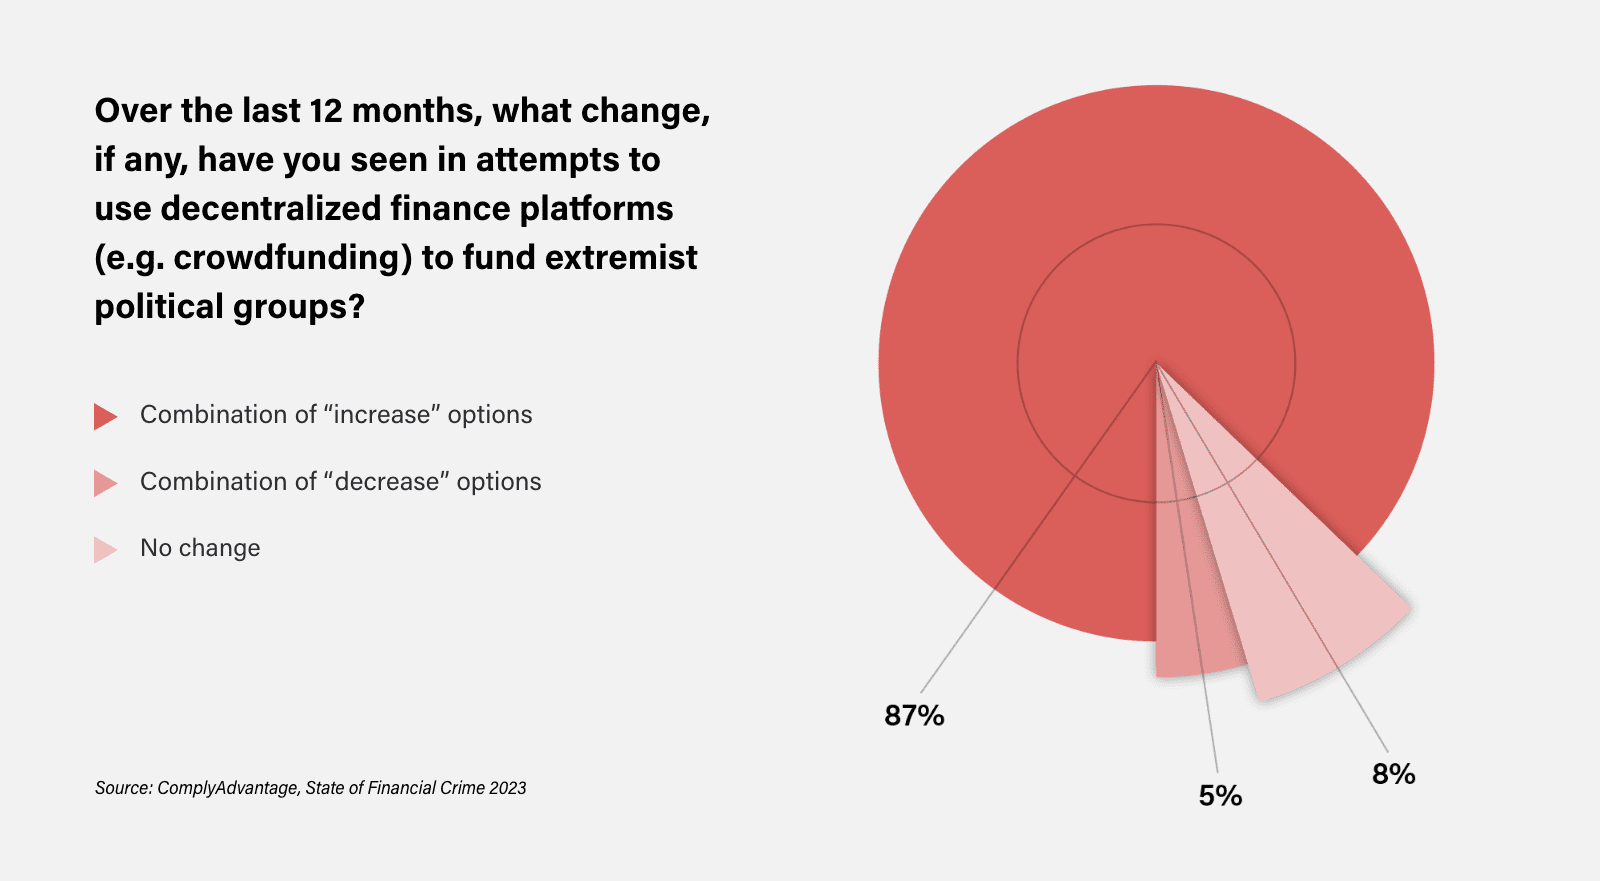 Survey results: What change have you seen in the use of DeFi platforms to fund extremist groups?